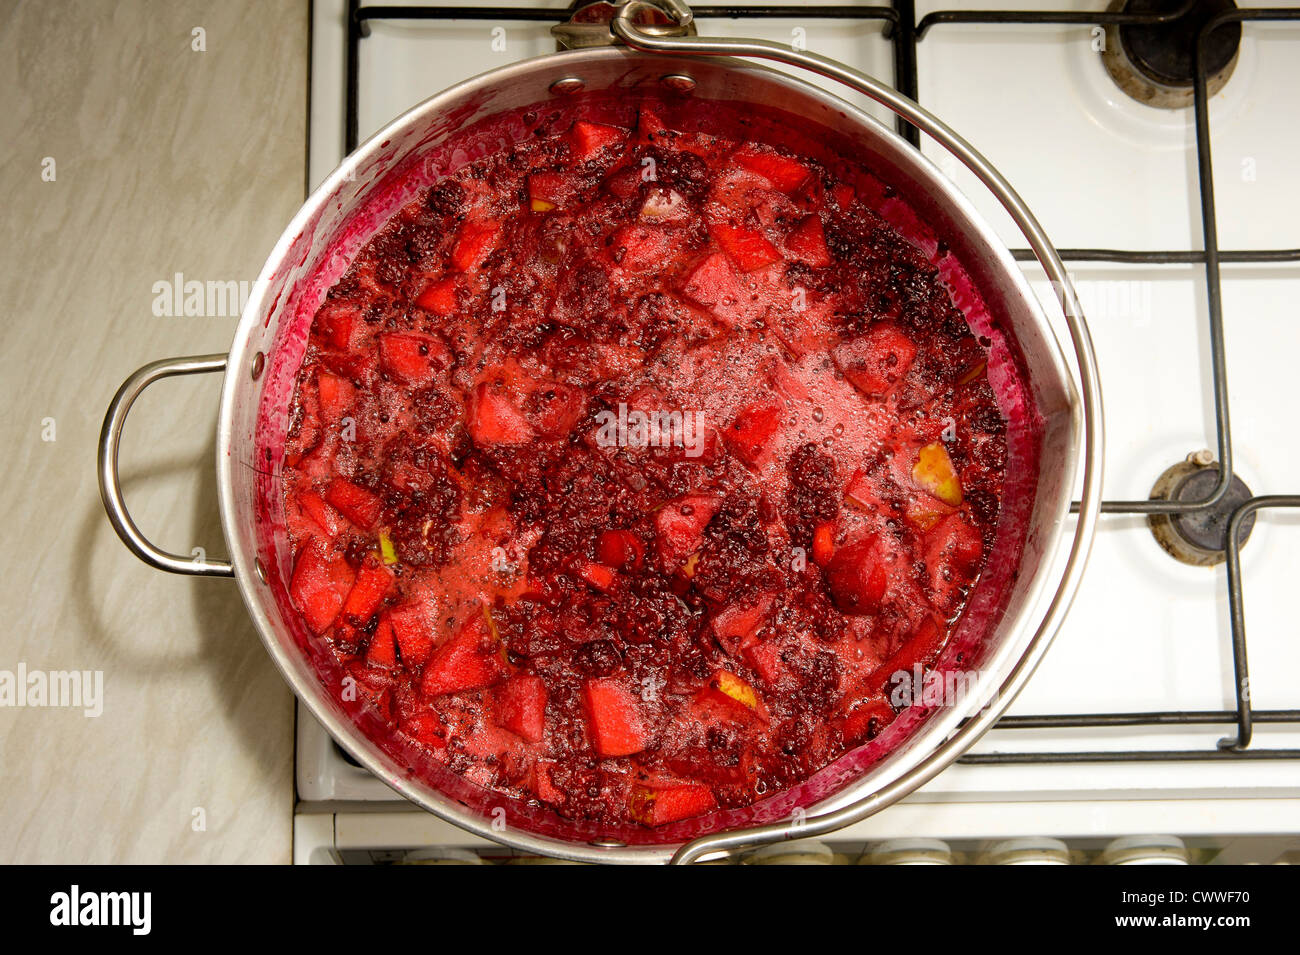 Jam making. Brambles and Apples boiling in Maslin Pan on home cooker Stock Photo